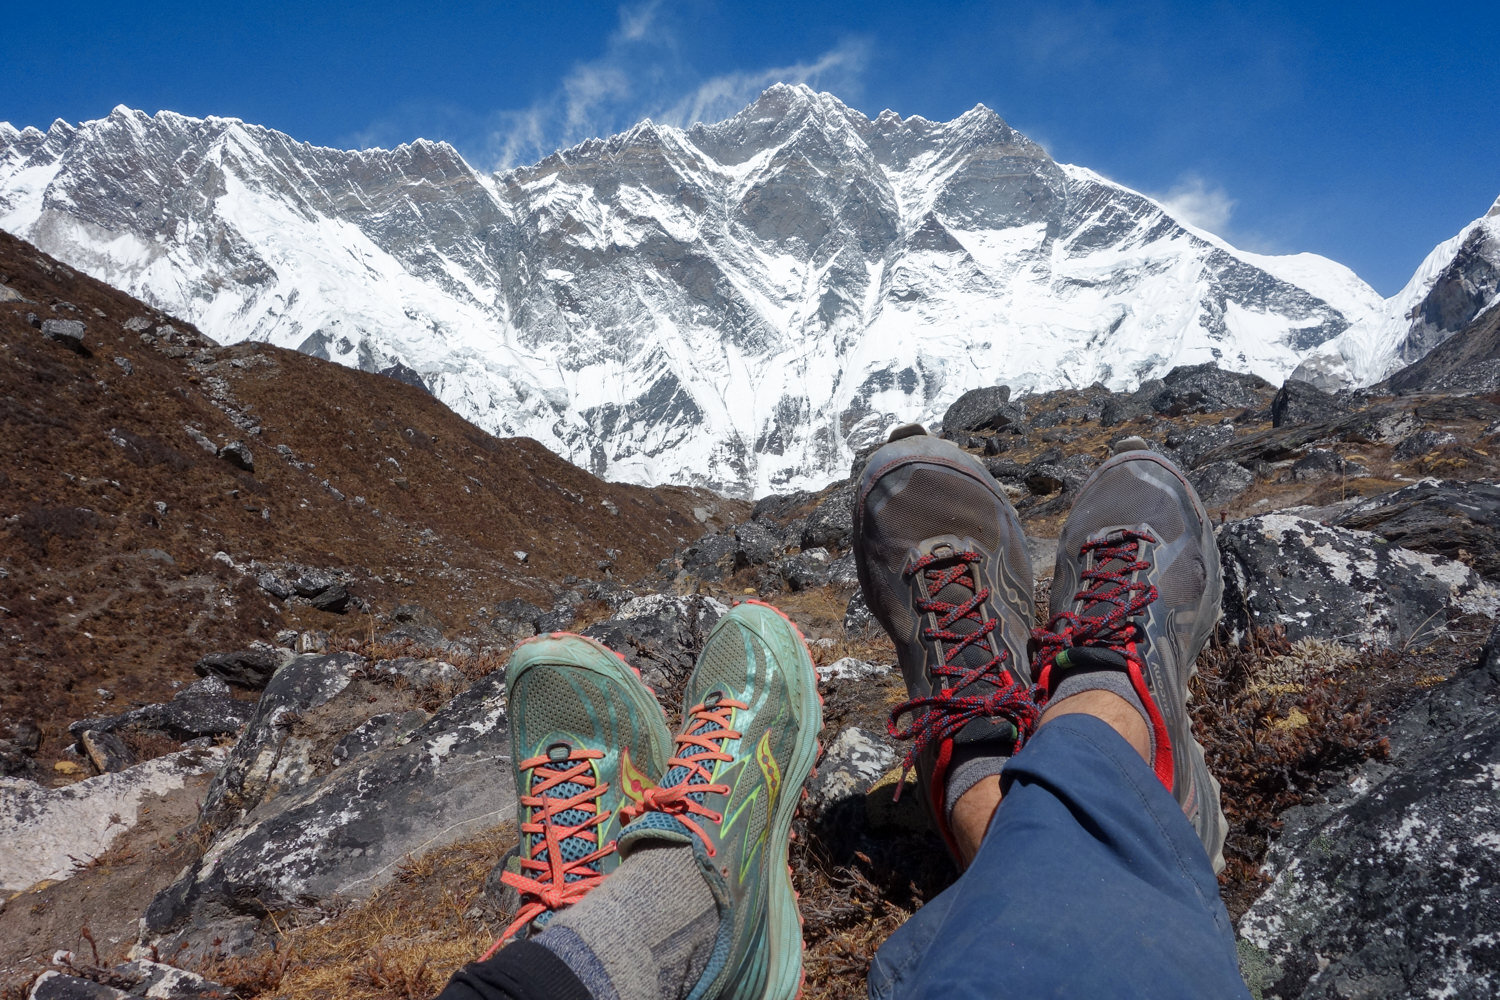 A PREVIOUS VERSION OF THE MEN’S AND WOMEN’S Saucony Peregrines ON THE EVEREST 3 PASSES LOOP IN NEPAL